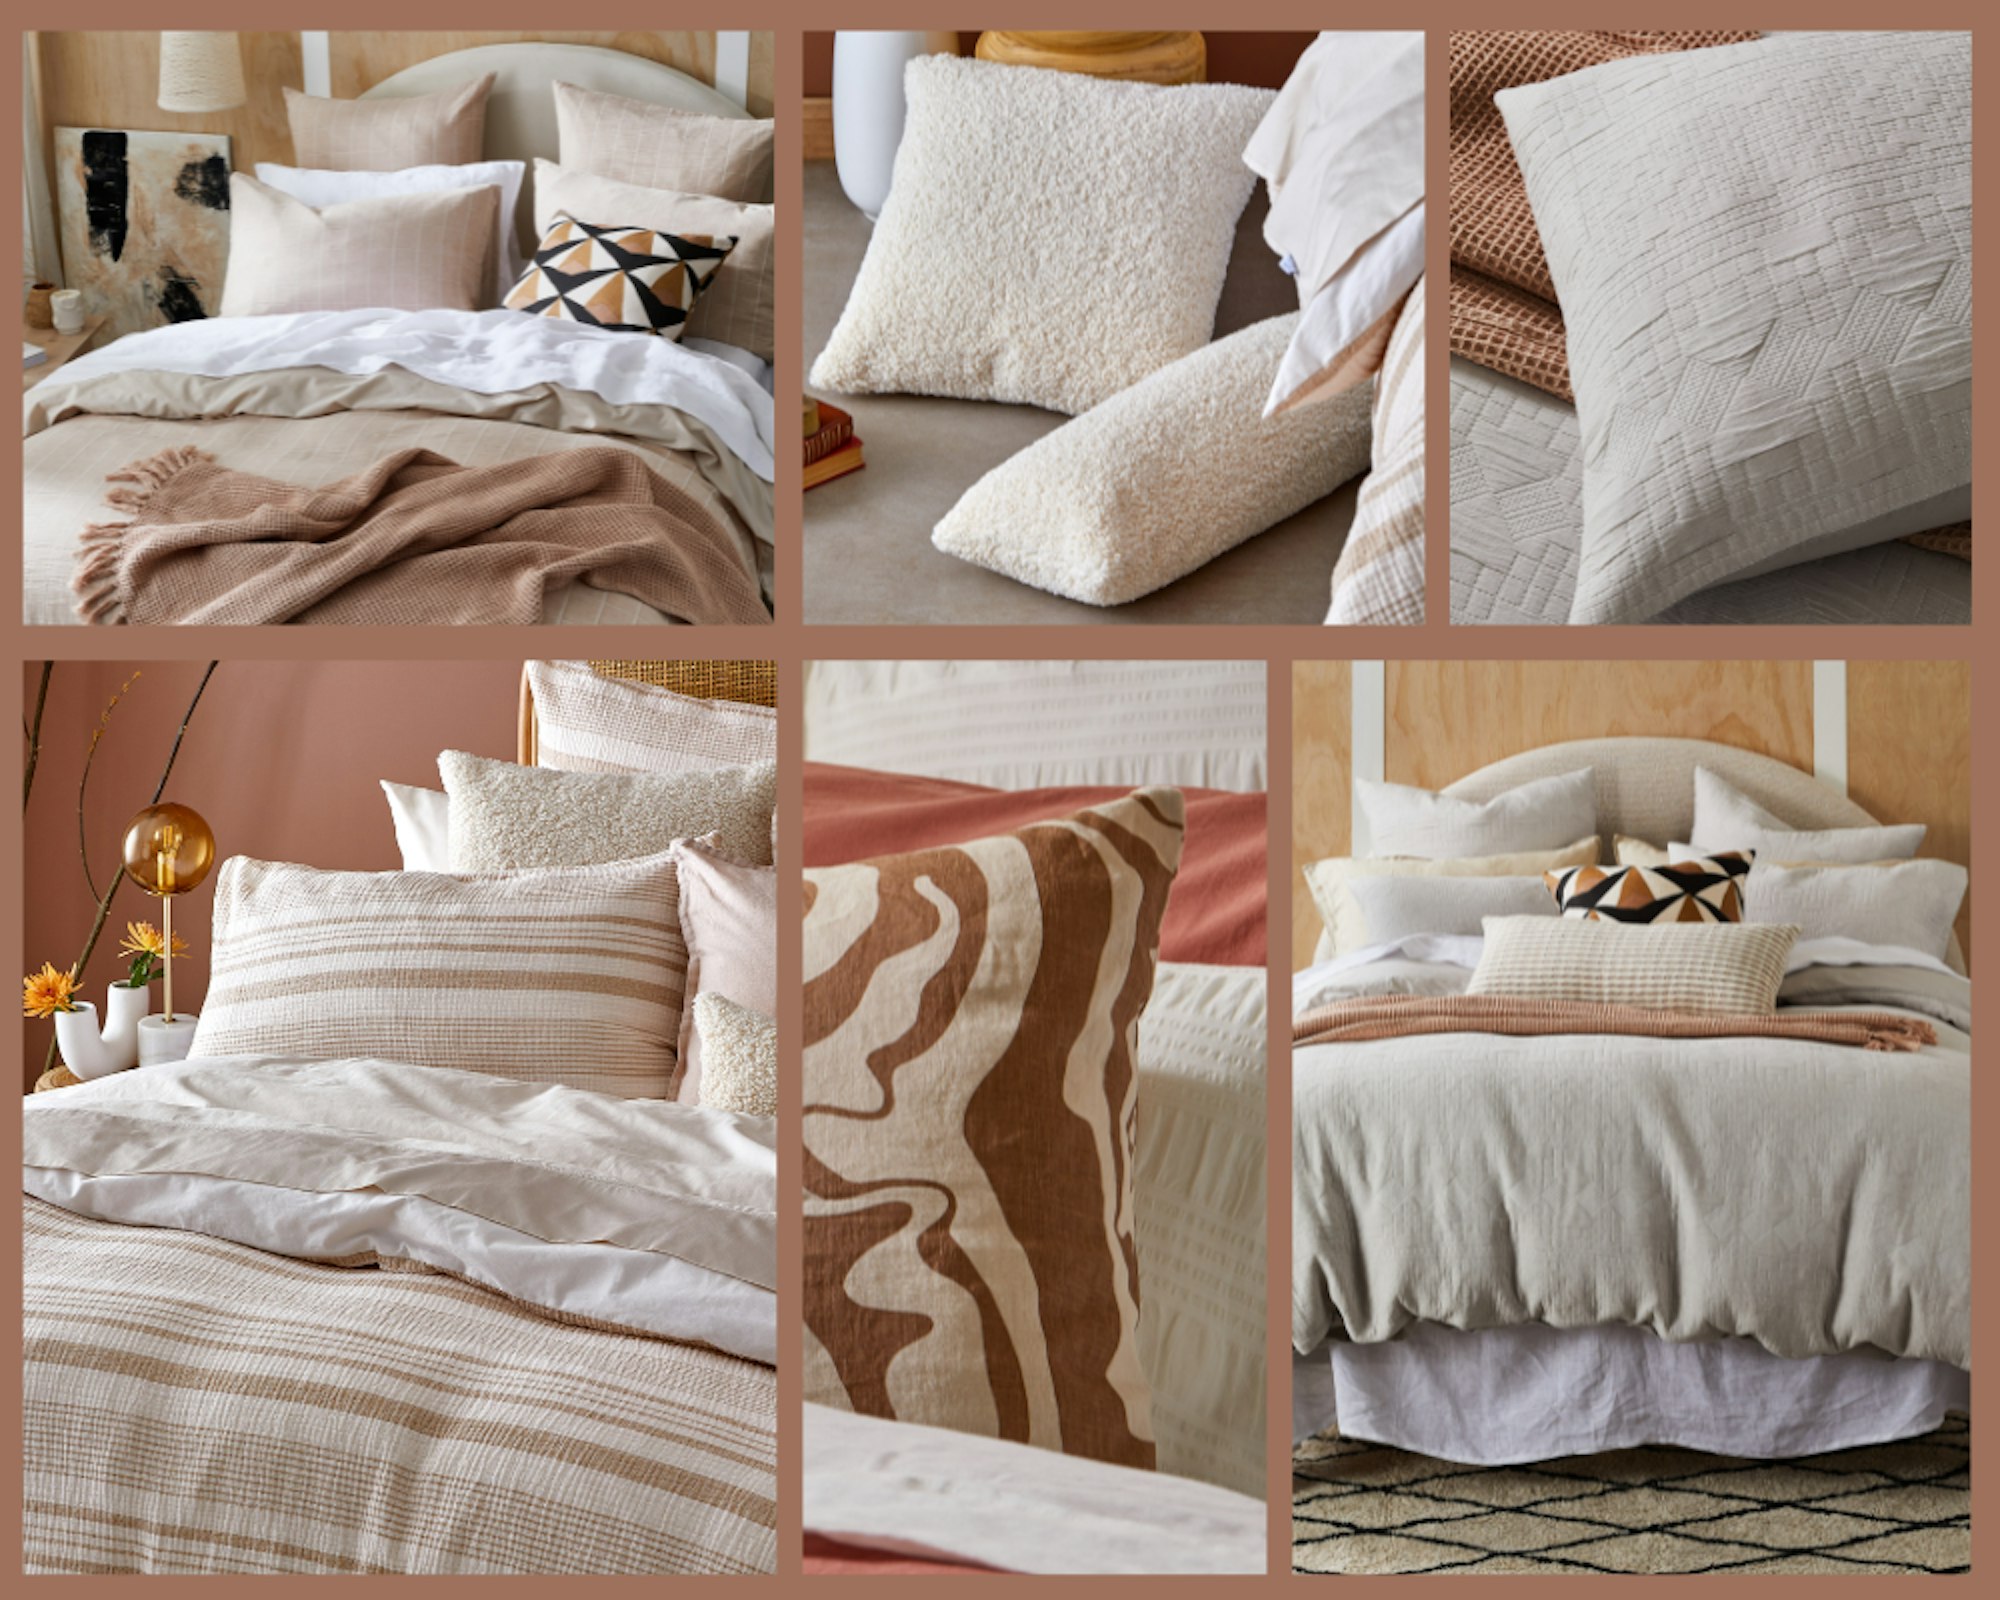 Home Beautiful collection. collage of bedding, decor, and homewares